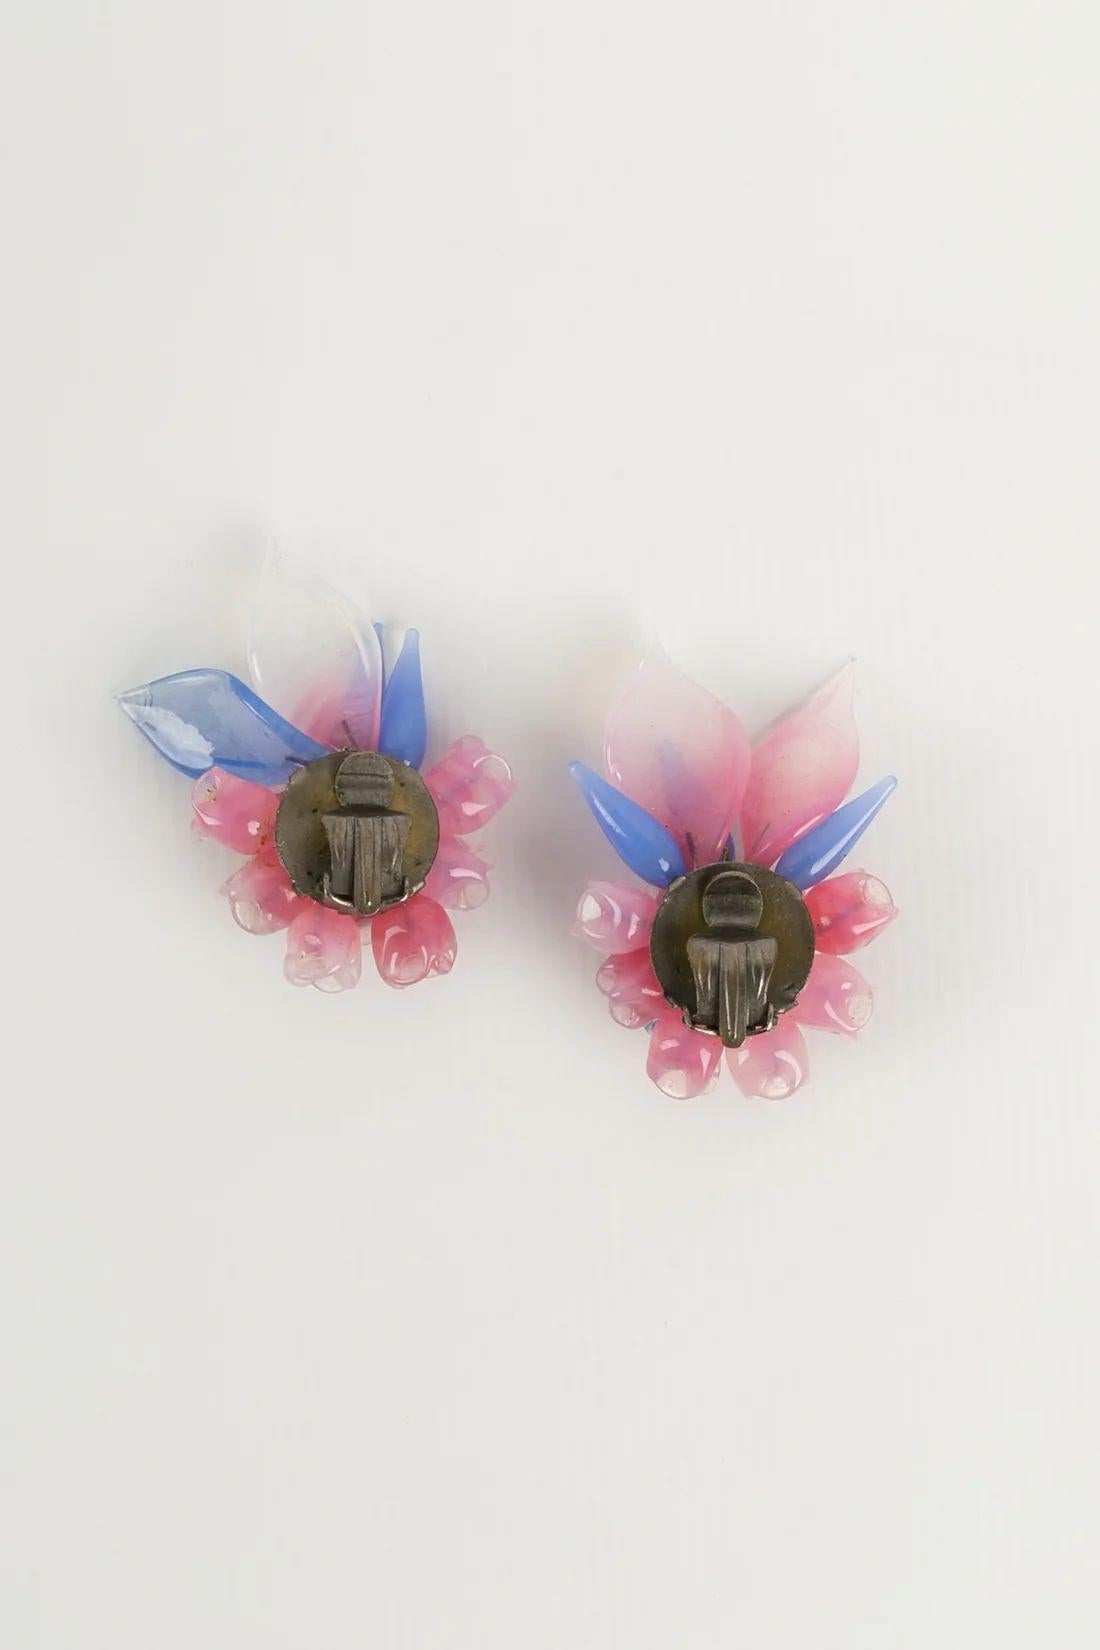 Artist Maison Rousselet Earrings In Glass Paste in Shades of Blue and Pink For Sale